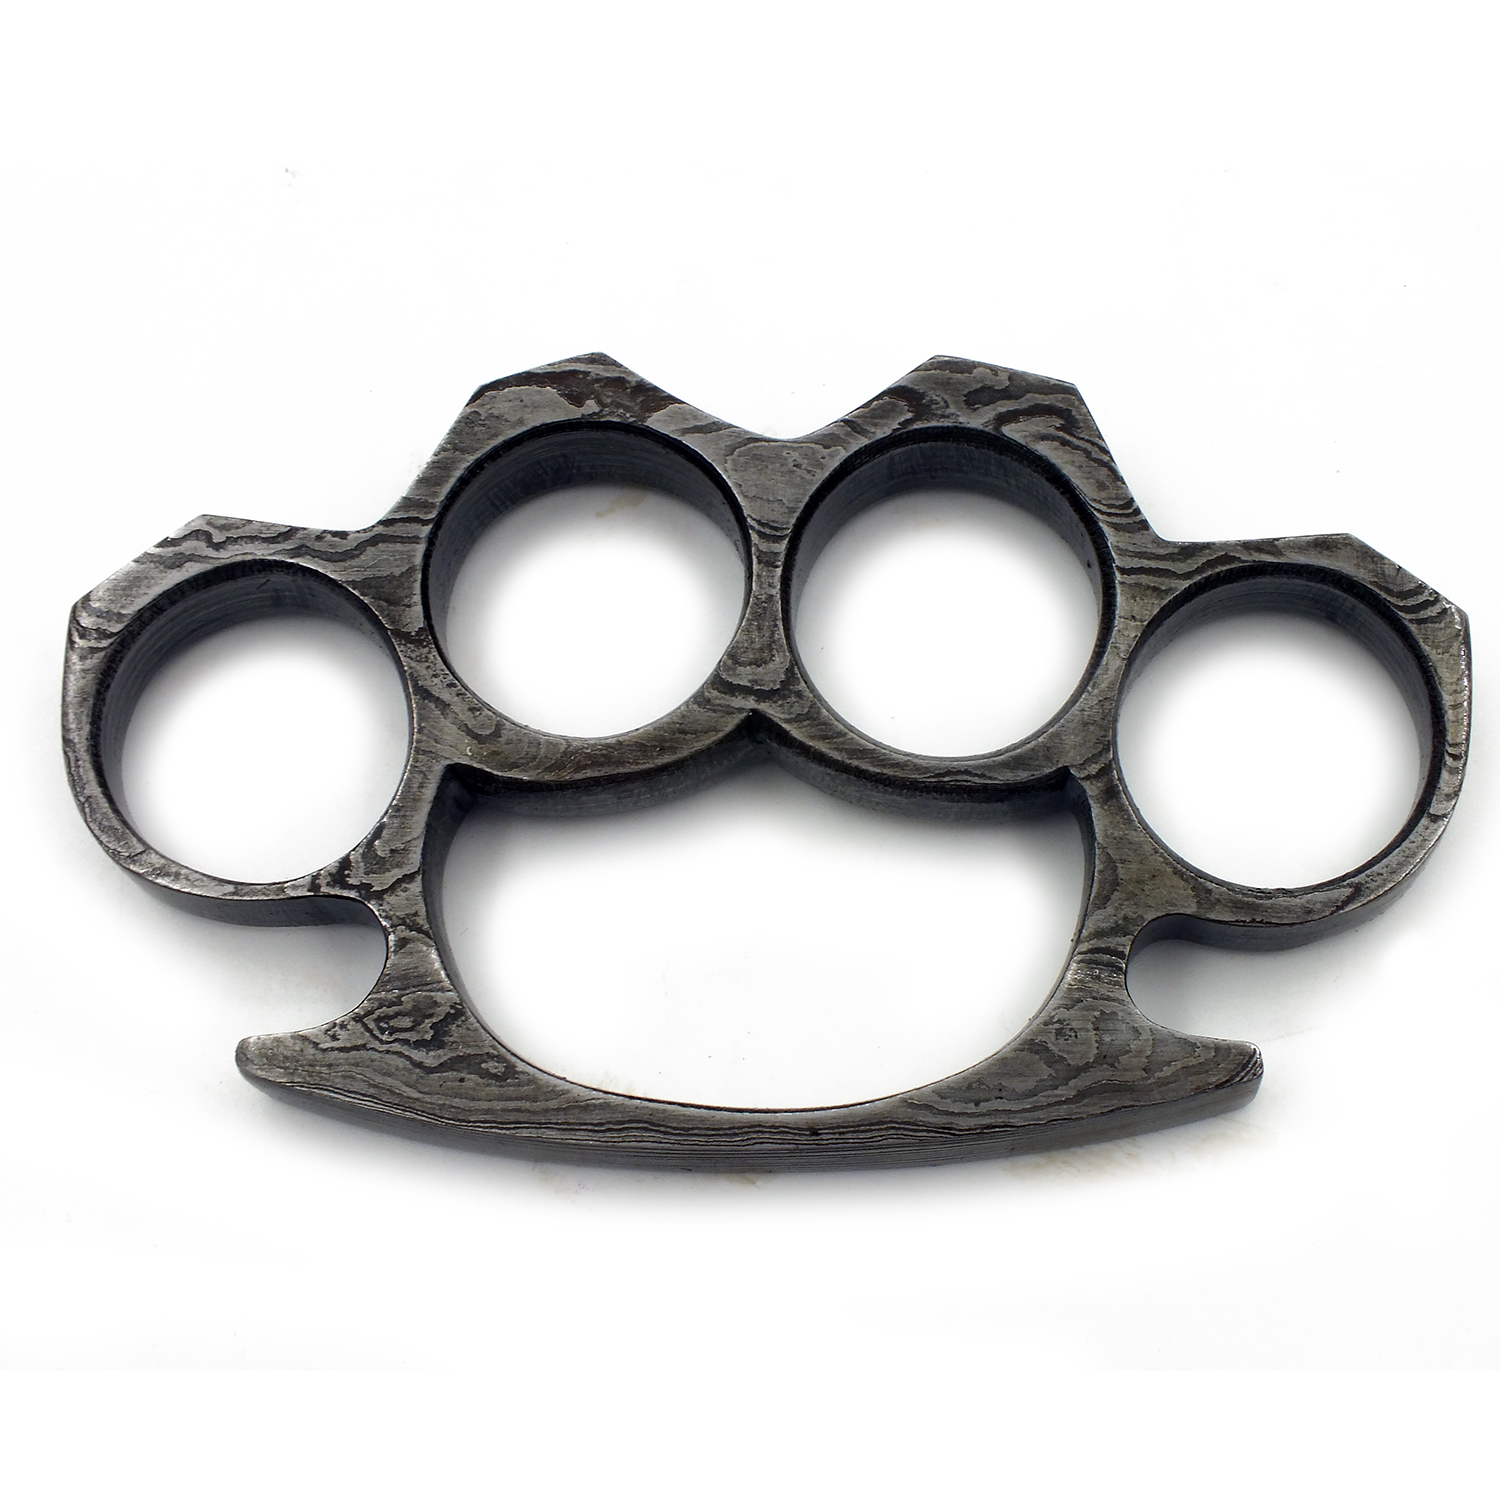 SW 0249 DAMASCUS Solid Damascus Steel Brass Knuckles